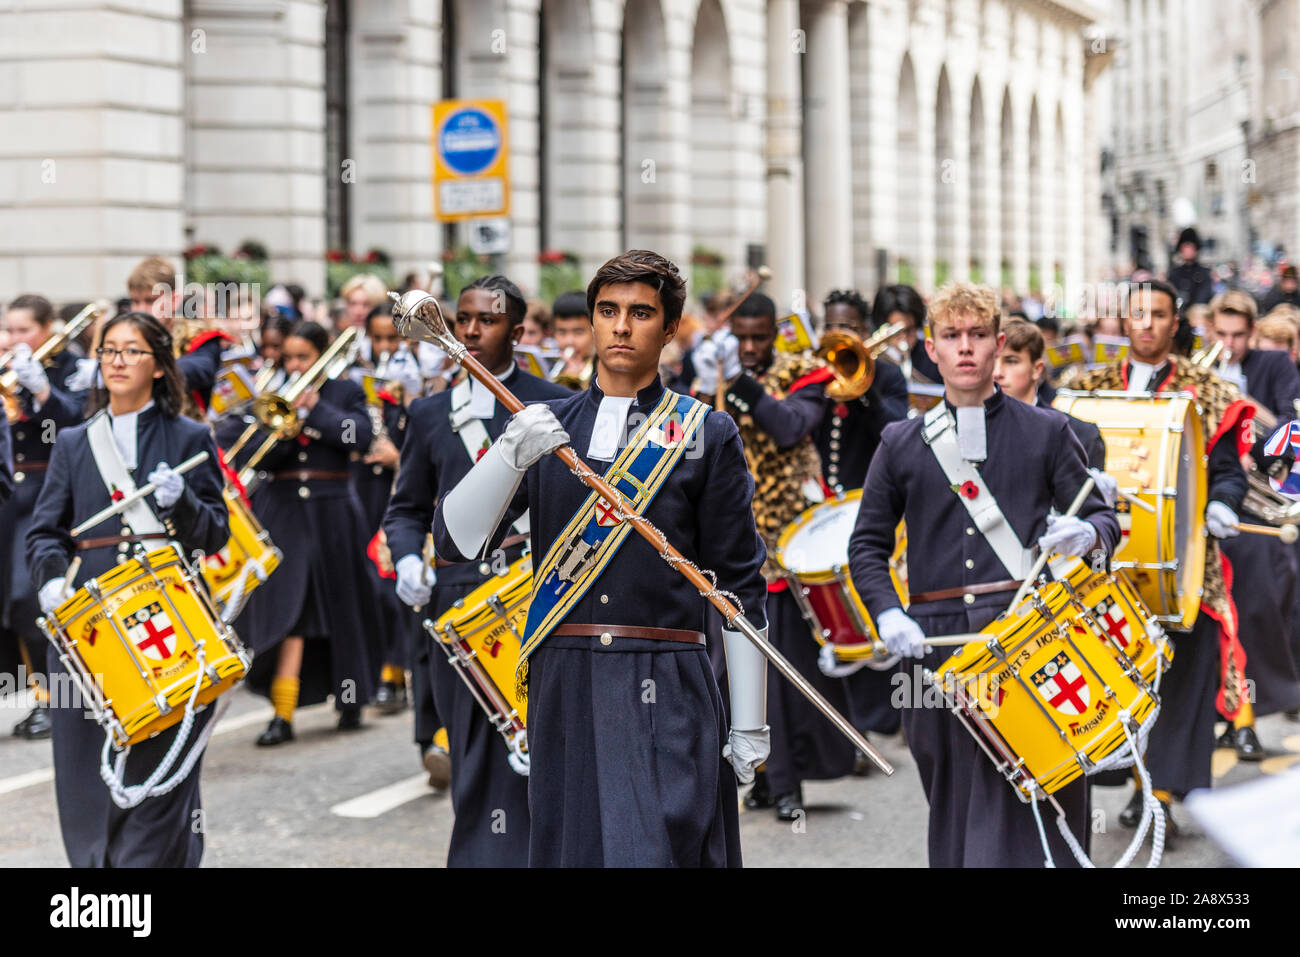 Christ's Hospital School Band at the Lord Mayor's Show Parade in City of London, UK. Stock Photo